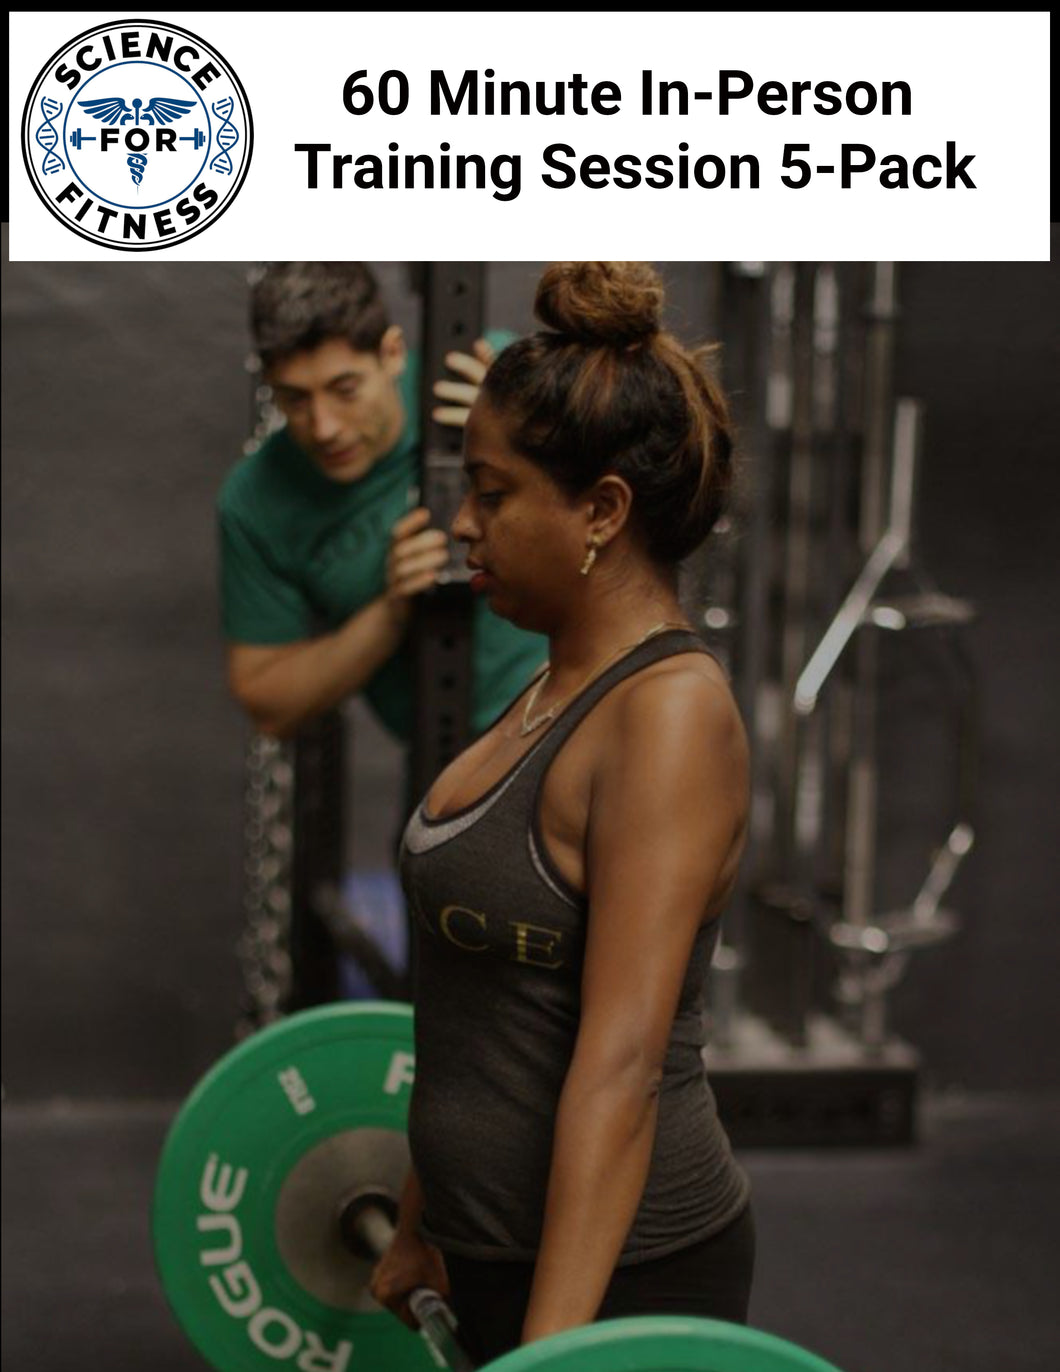 60 Min In-Person Training Session 5-Pack